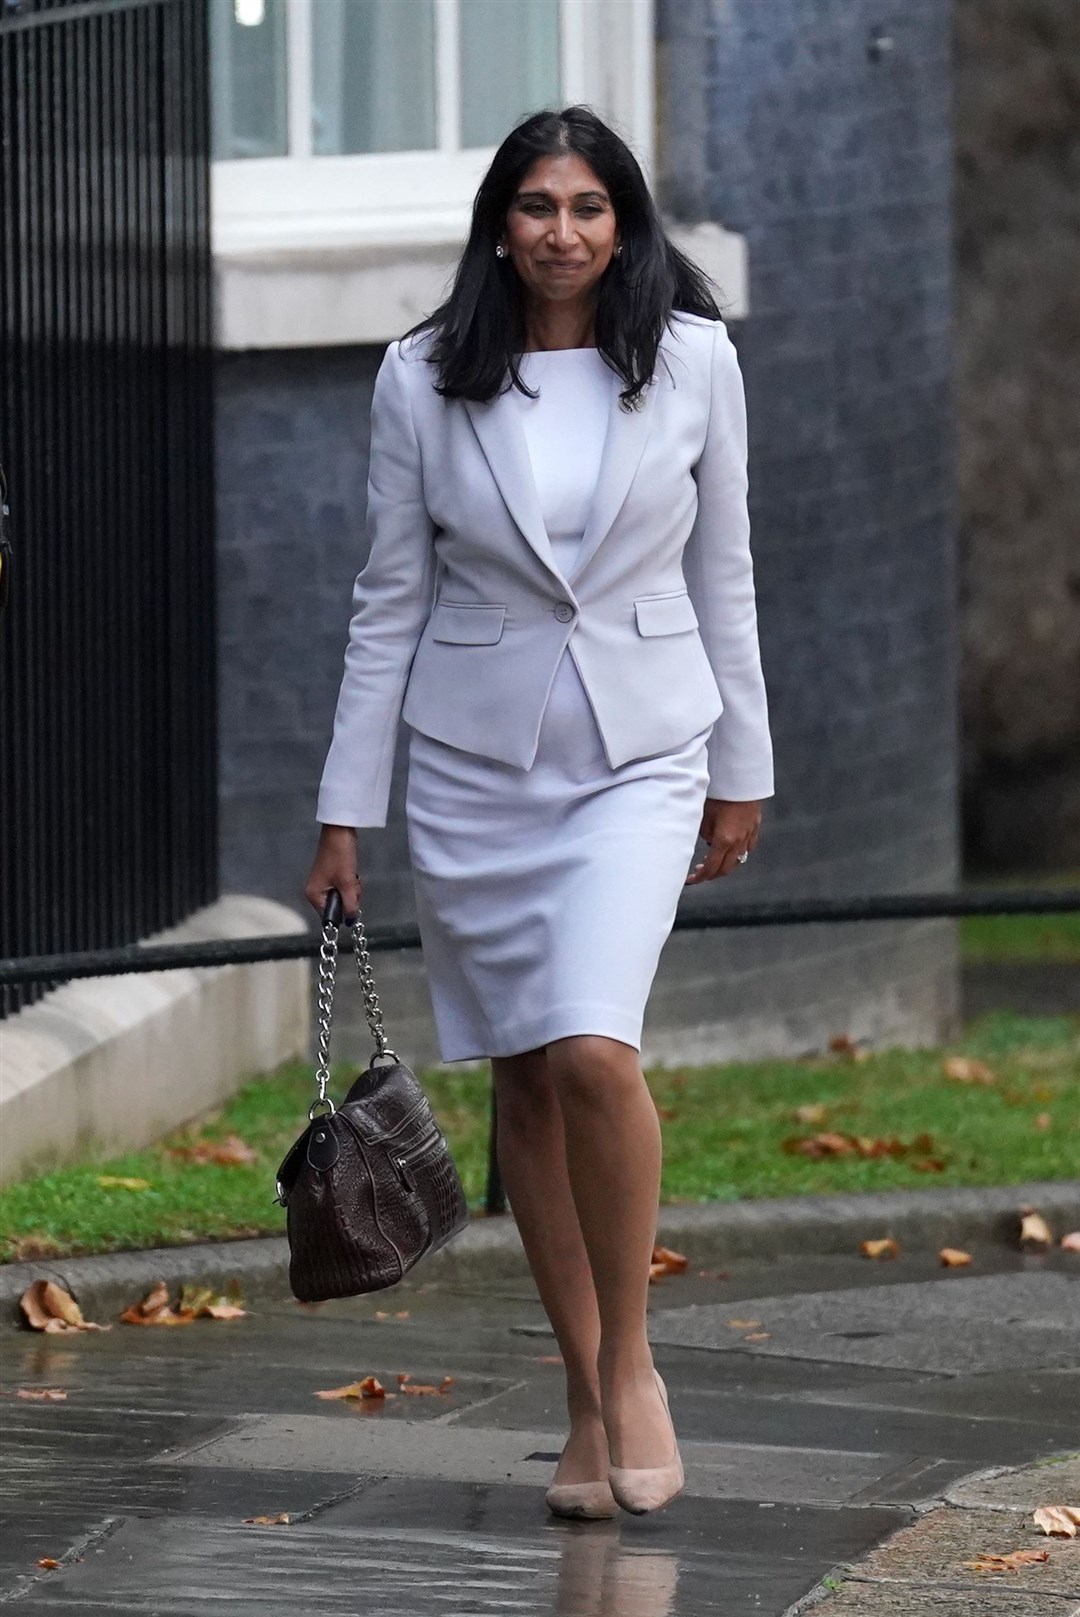 Suella Braverman arrives for a meeting with Prime Minister Liz Truss in Downing Street (Kirsty O’Connor/PA)